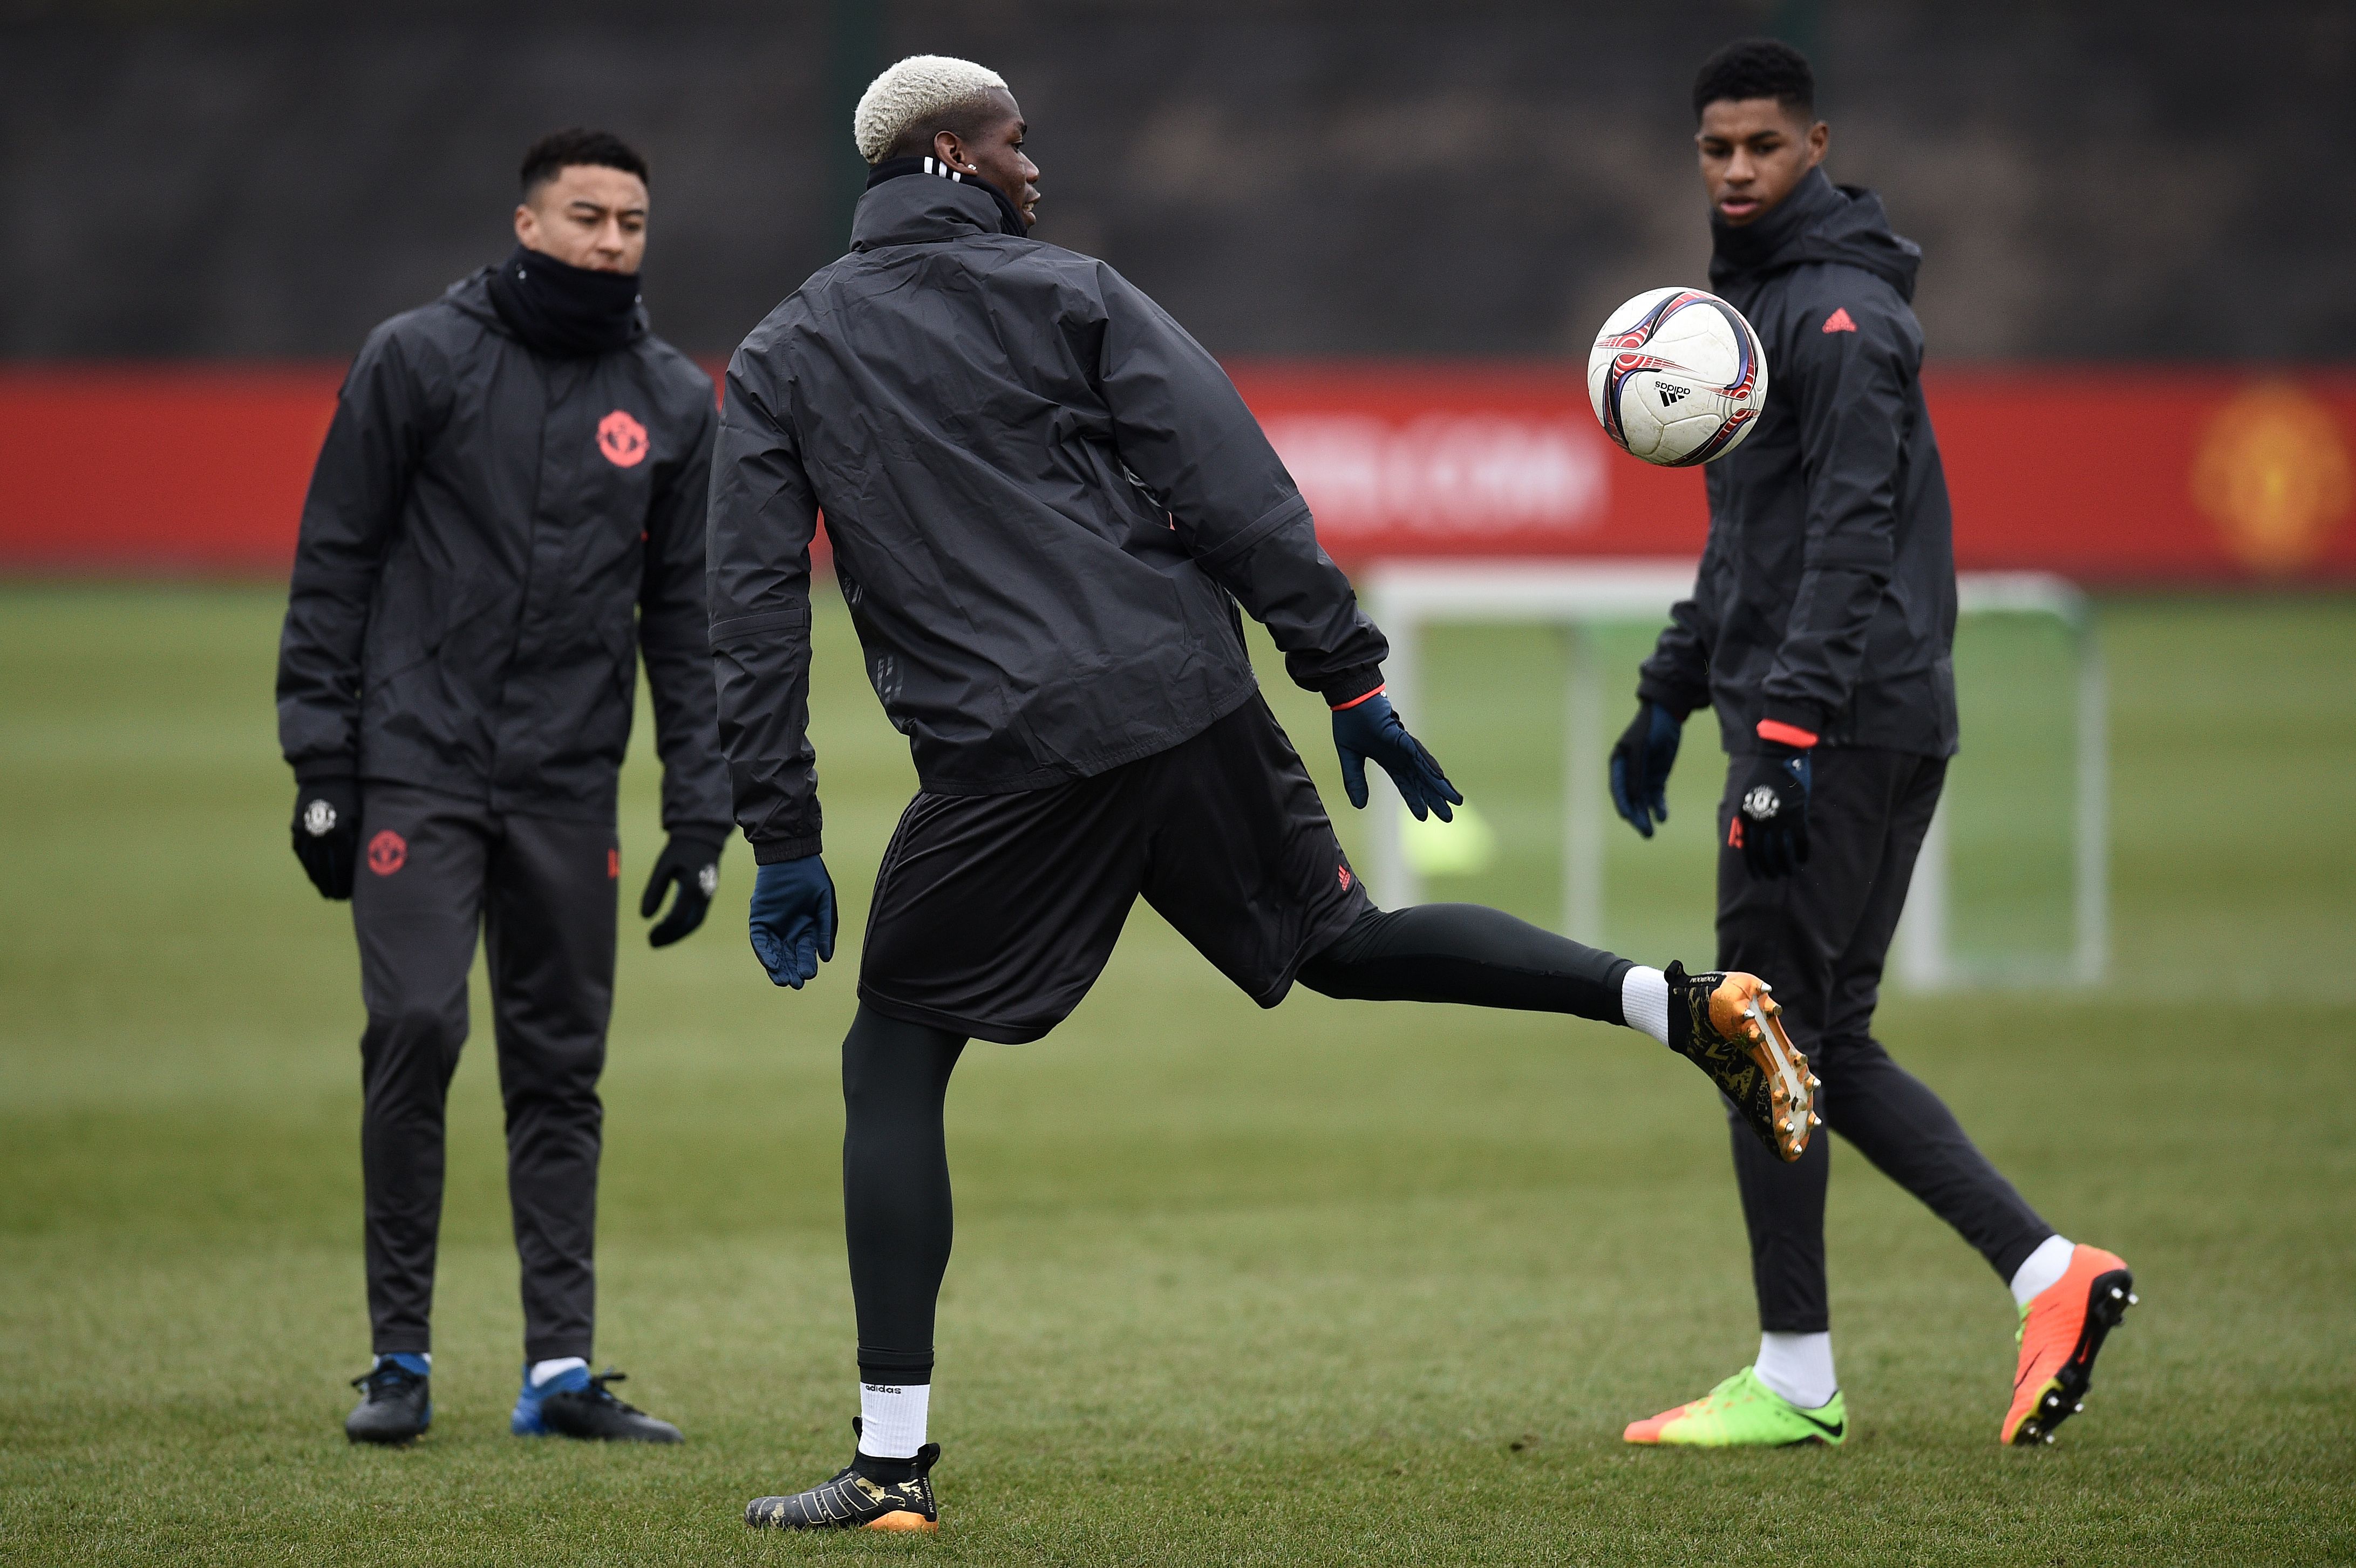 Manchester United's English midfielder Jesse Lingard (L), Manchester United's French midfielder Paul Pogba (C), and Manchester United's English striker Marcus Rashford attend a training session at their Carrington base in Manchester, northwest England, on February 15, 2017, on the eve of their UEFA Europa League Round of 32 first-leg football match against Saint-Etienne on February 16. / AFP / Oli SCARFF (Photo credit should read OLI SCARFF/AFP/Getty Images)